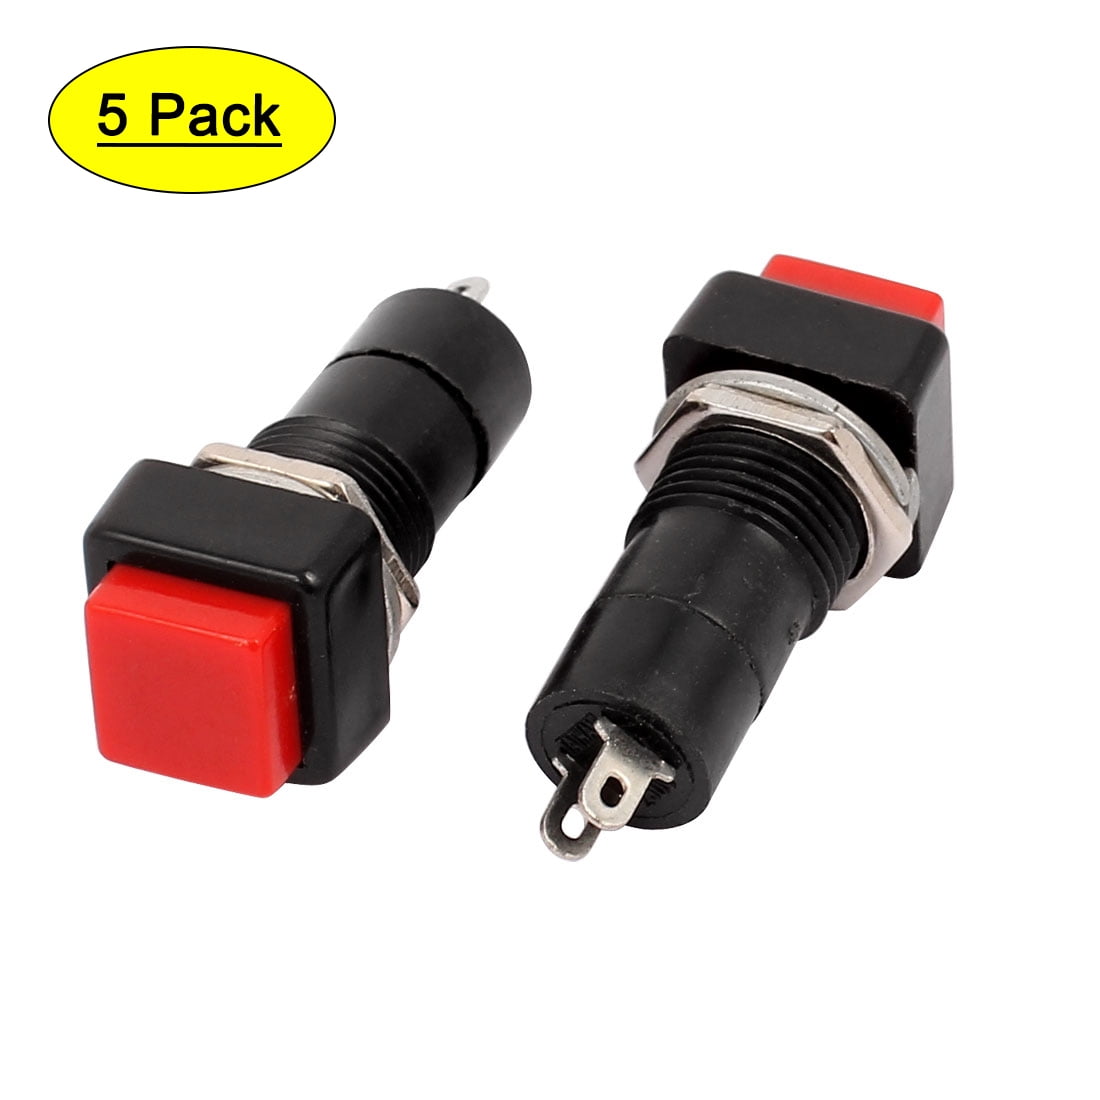 A pack of five Red Push Button Switch Momentary 5 